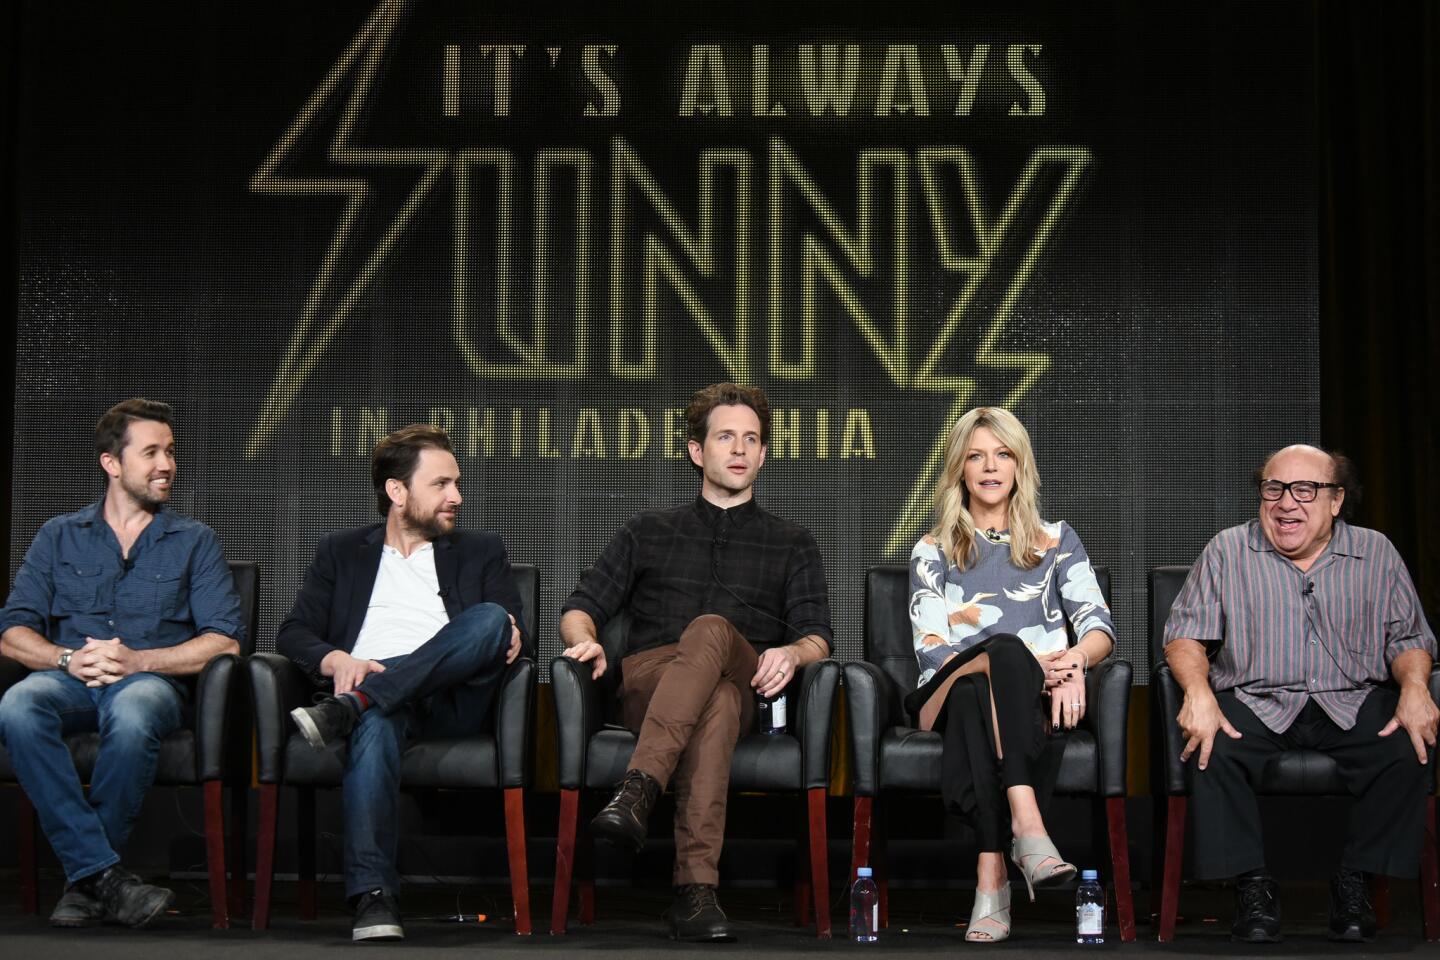 From left, Rob McElhenney, Charlie Day, Glenn Howerton, Kaitlin Olson and Danny DeVito during the "It's Always Sunny in Philadelphia" panel discussion at the FX 2015 Winter TCA.